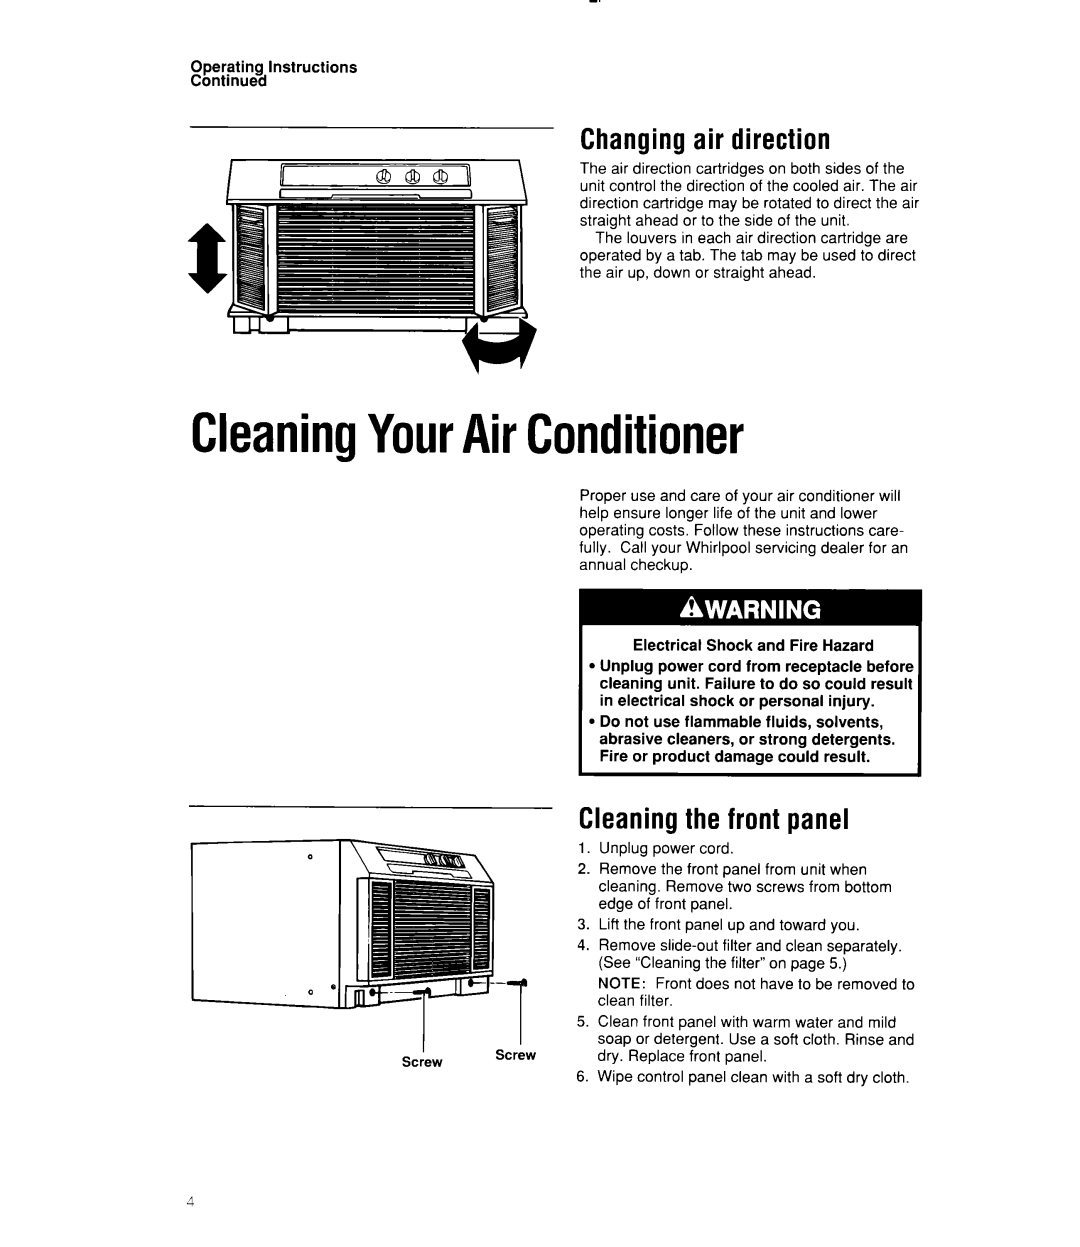 Whirlpool ACU102, ACQ102, ACQ122, ACQ082, ACU124 CleaningYourAirConditioner, Changing air direction, Cleaning the front panel 